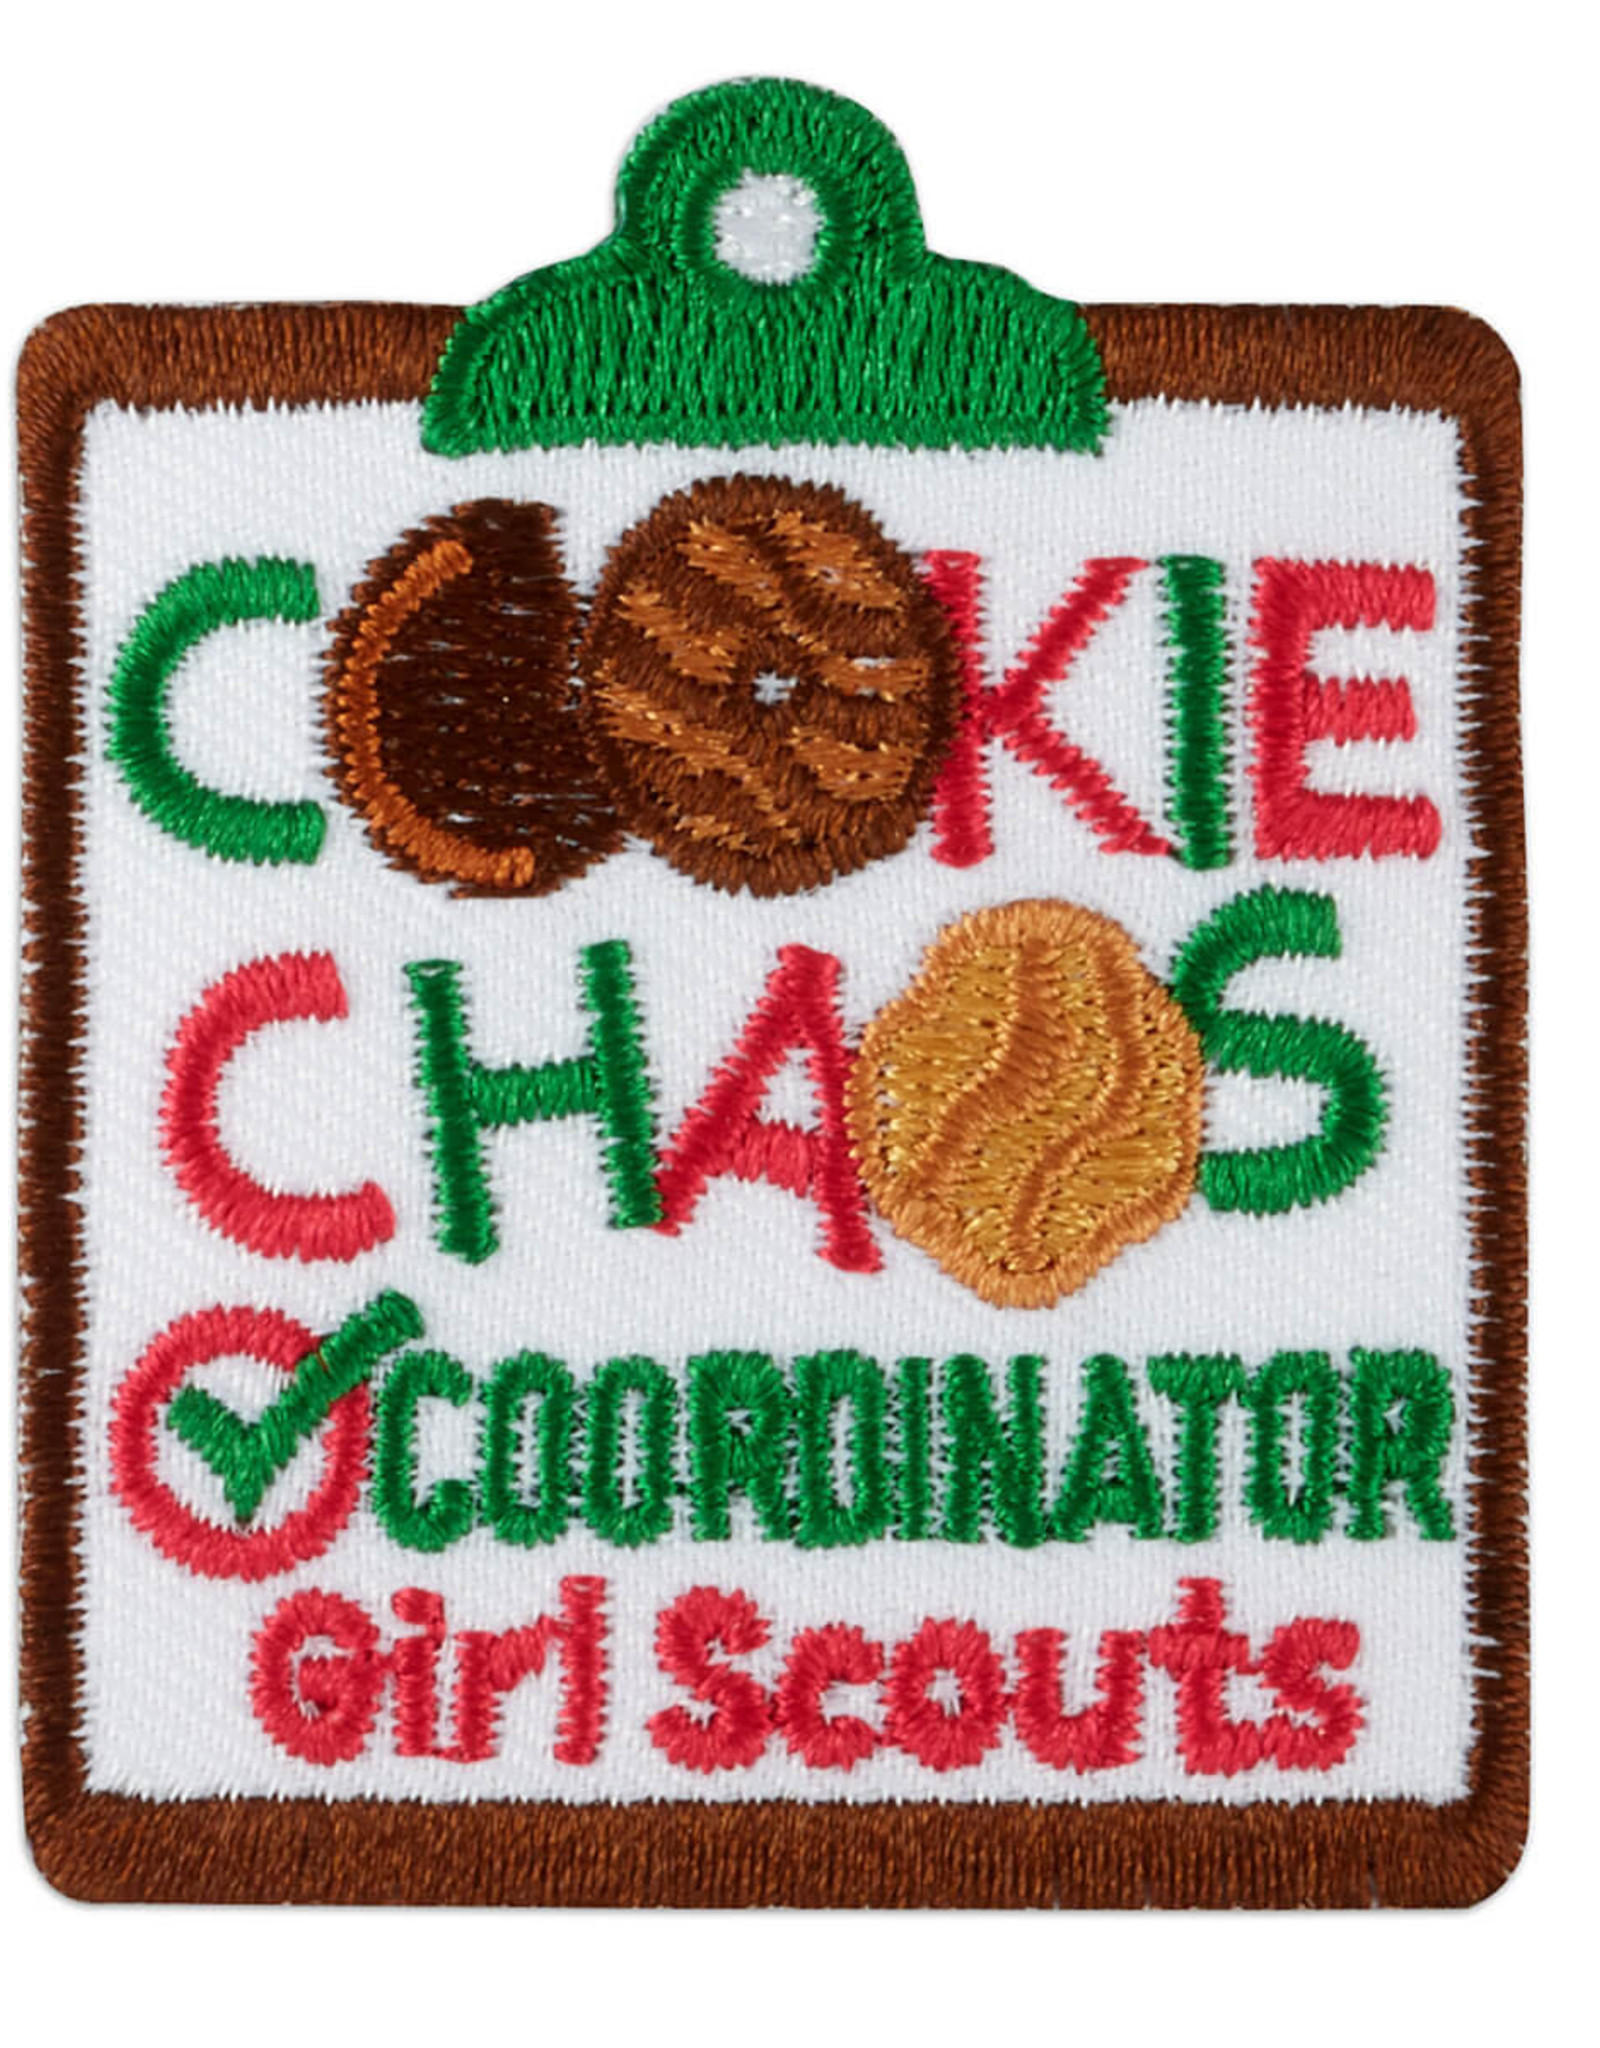 GIRL SCOUTS OF THE USA ! Cookie Chaos Coordinator Fun Patch